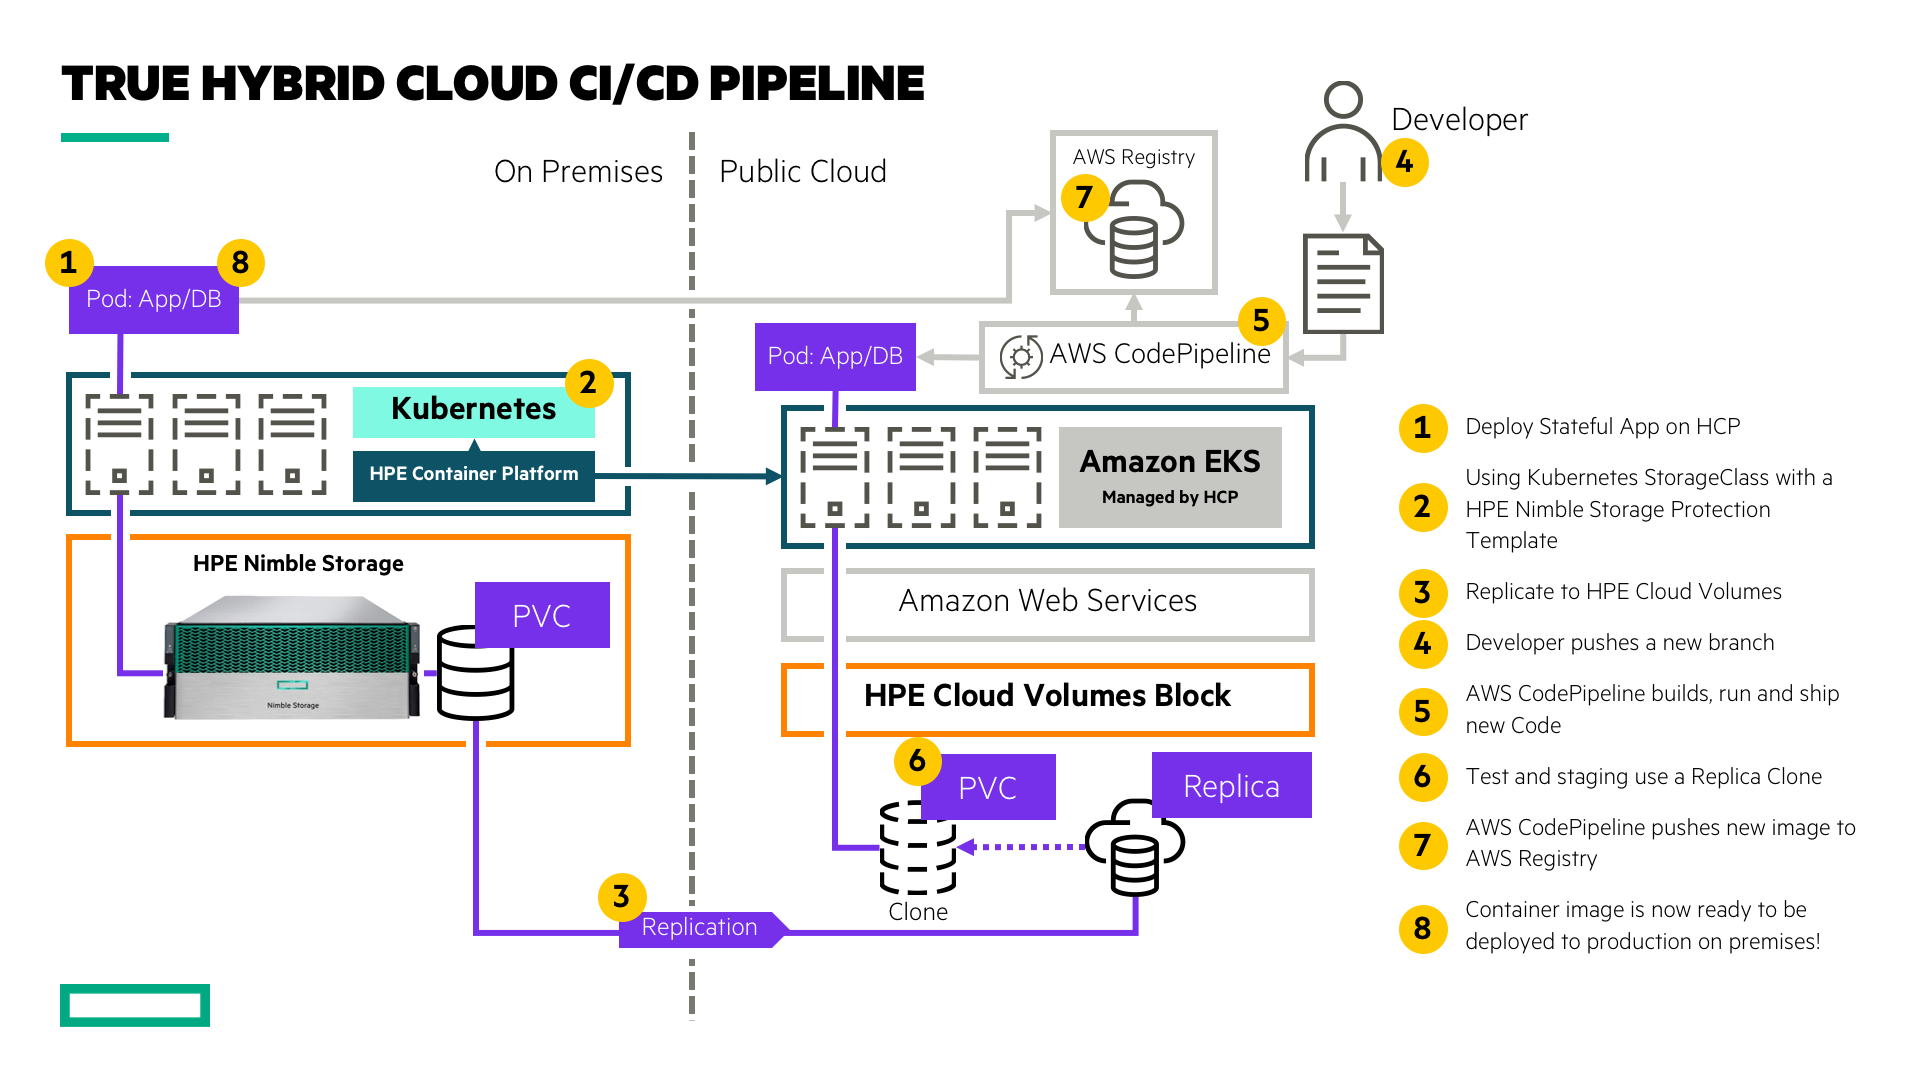 True Hybrid Cloud CI/CD Pipelines Accelerated by HPE